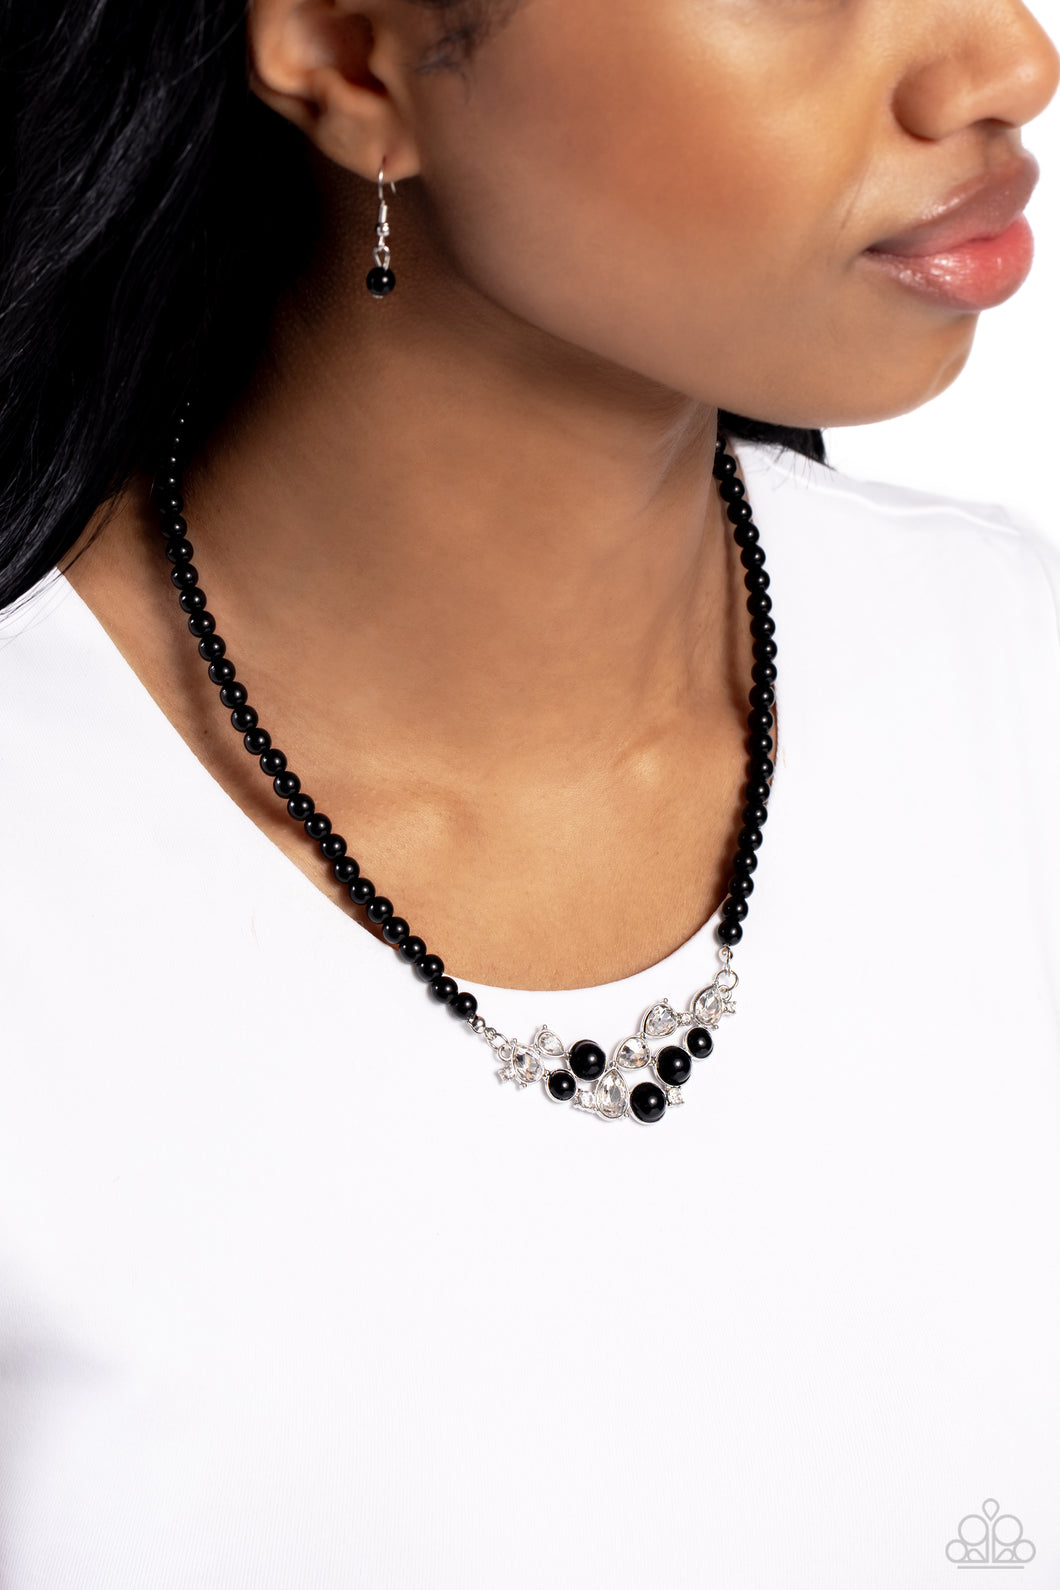 Paparazzi “Pampered Pearls” Black Necklace Earring Set